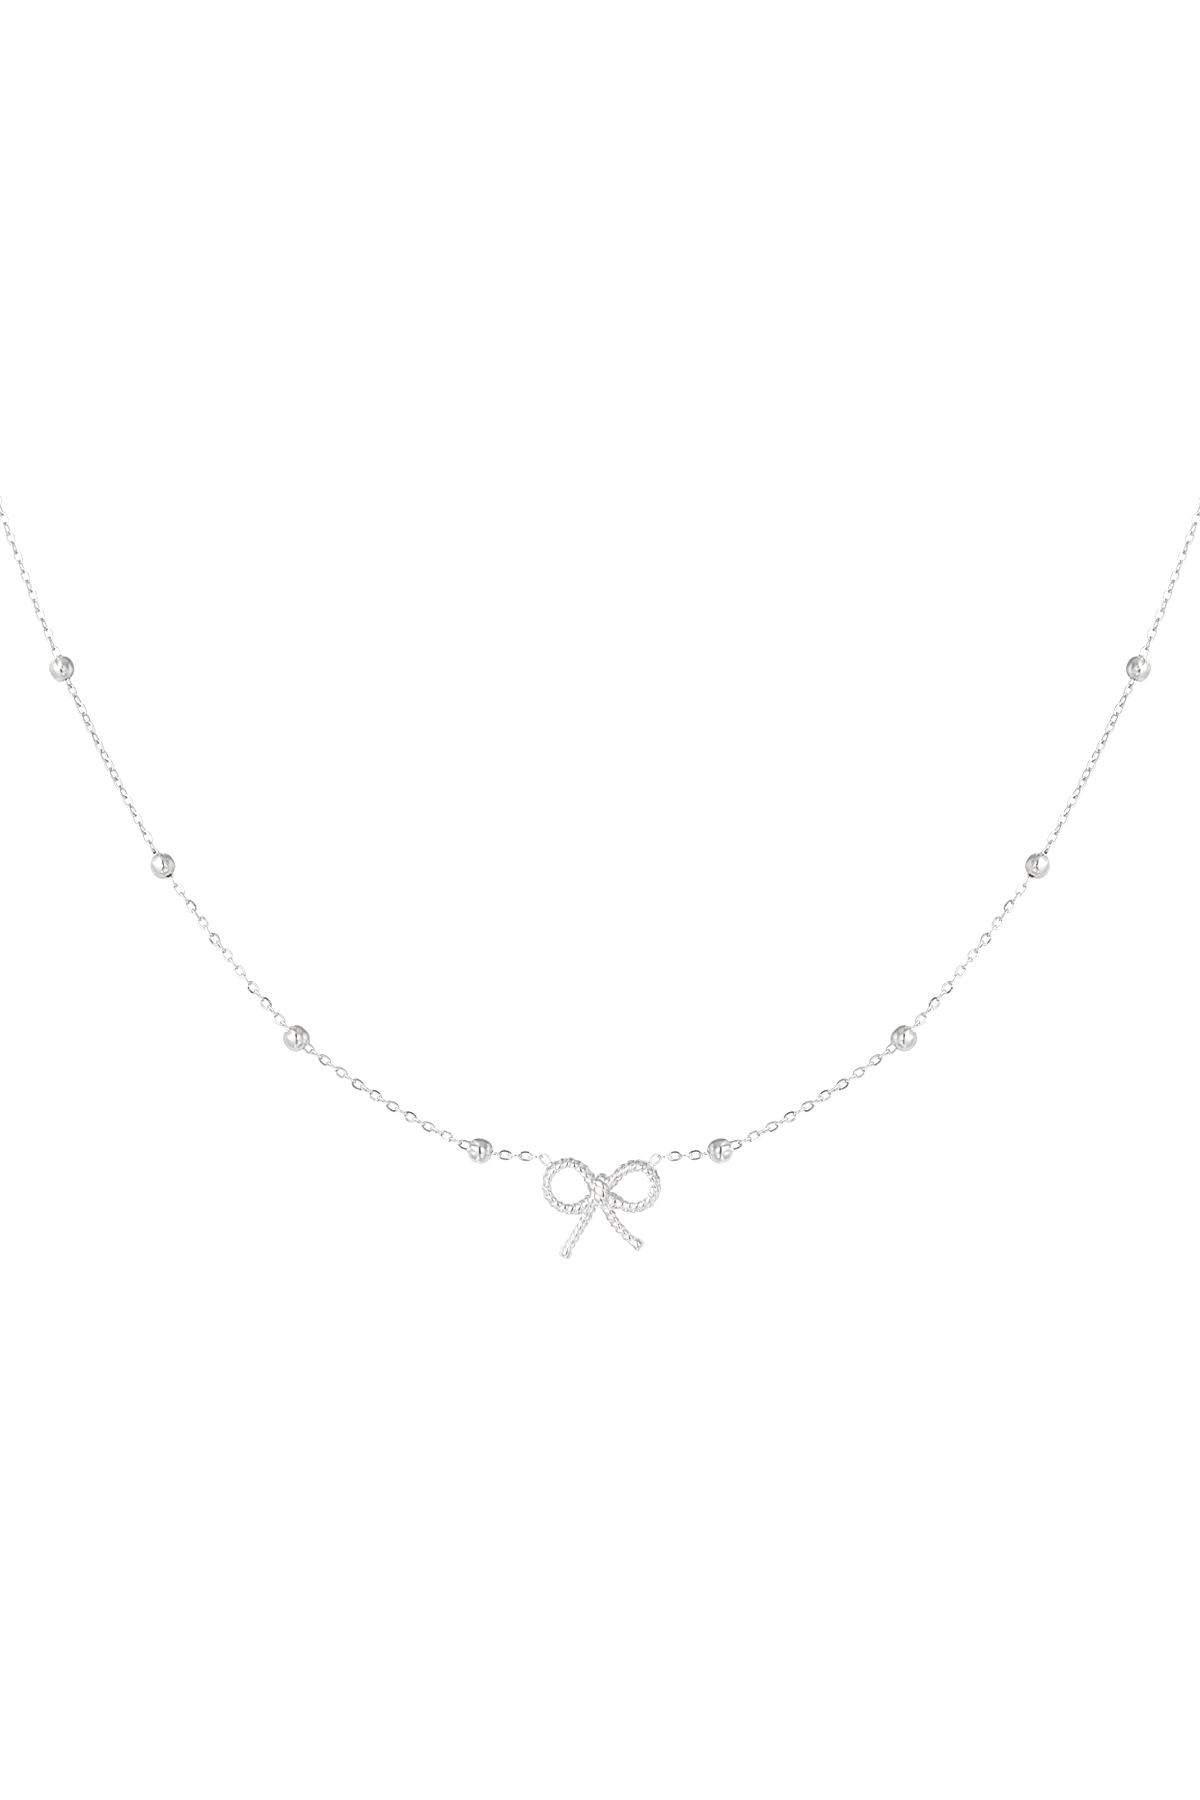 Necklace bow basic - silver h5 